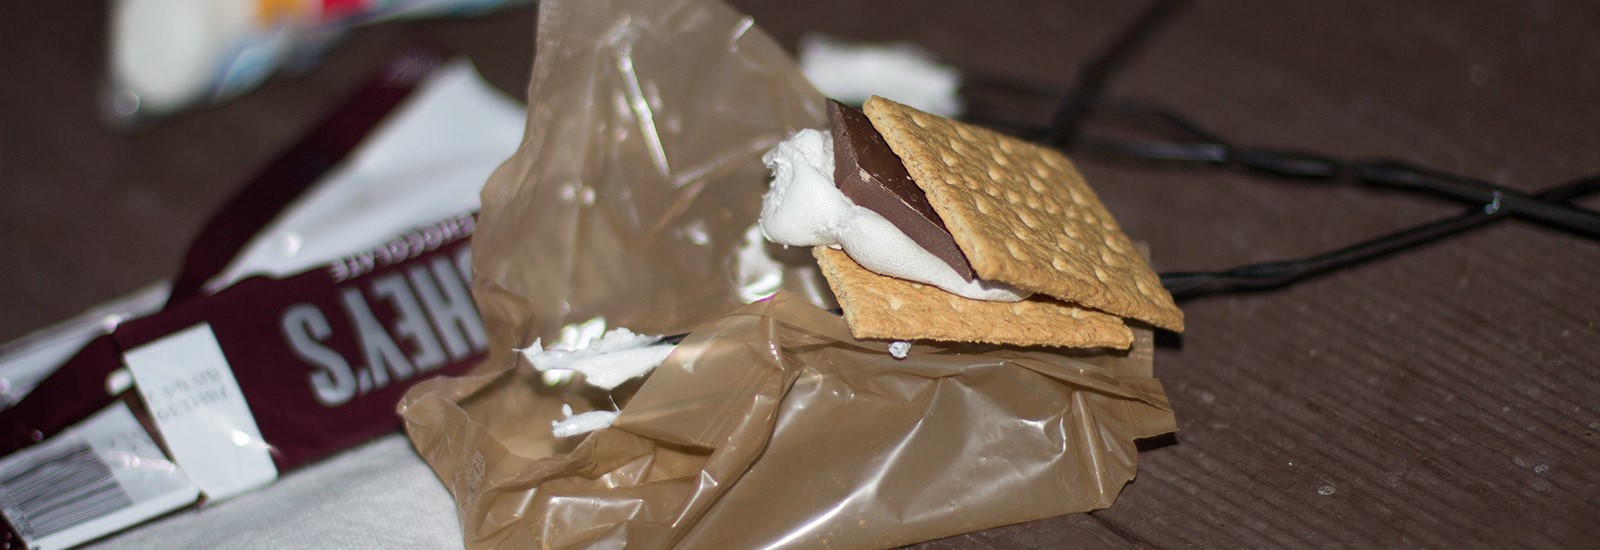 Photo of S'mores on a picnic table at night